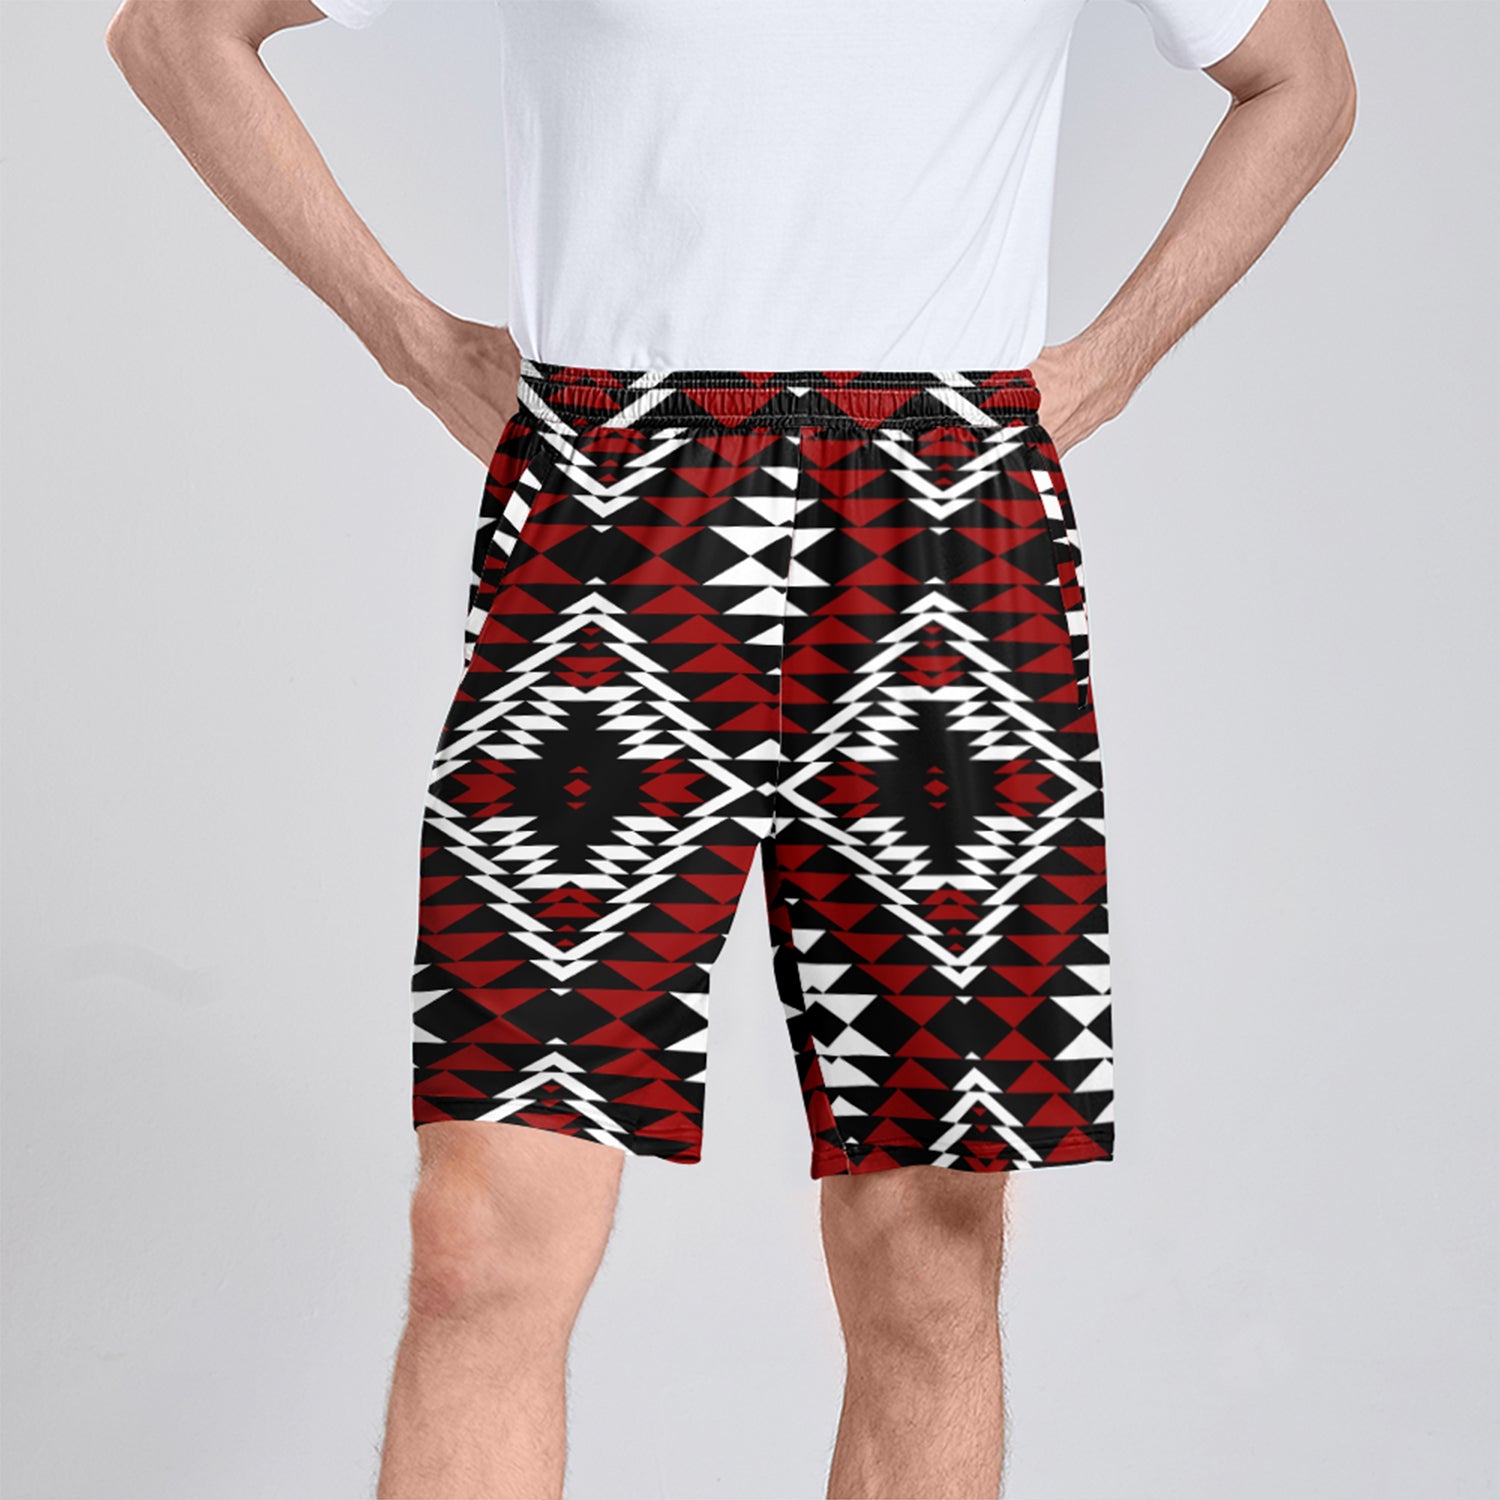 Taos Wool Athletic Shorts with Pockets